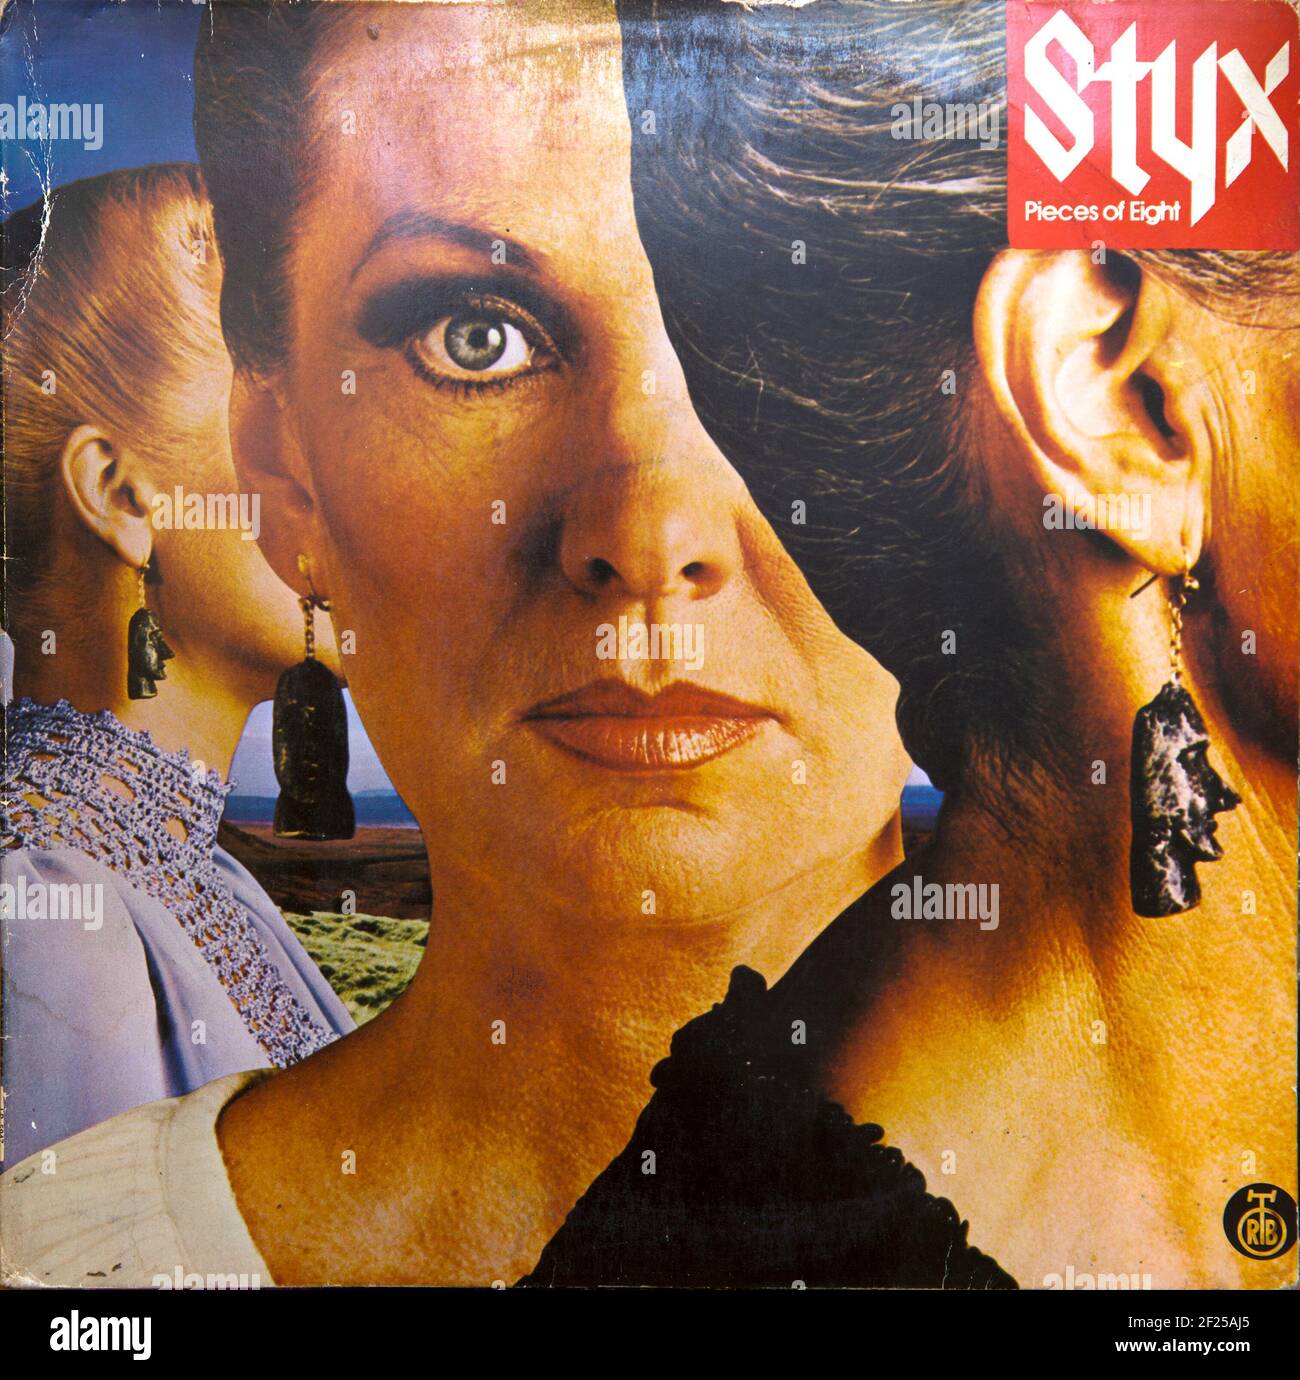 BELGRADE, SERBIA - OCTOBER 23, 2019: Cover of vinyl album Pieces of Eight by Styx. It is their eight studio album released at September 1, 1978 Stock Photo